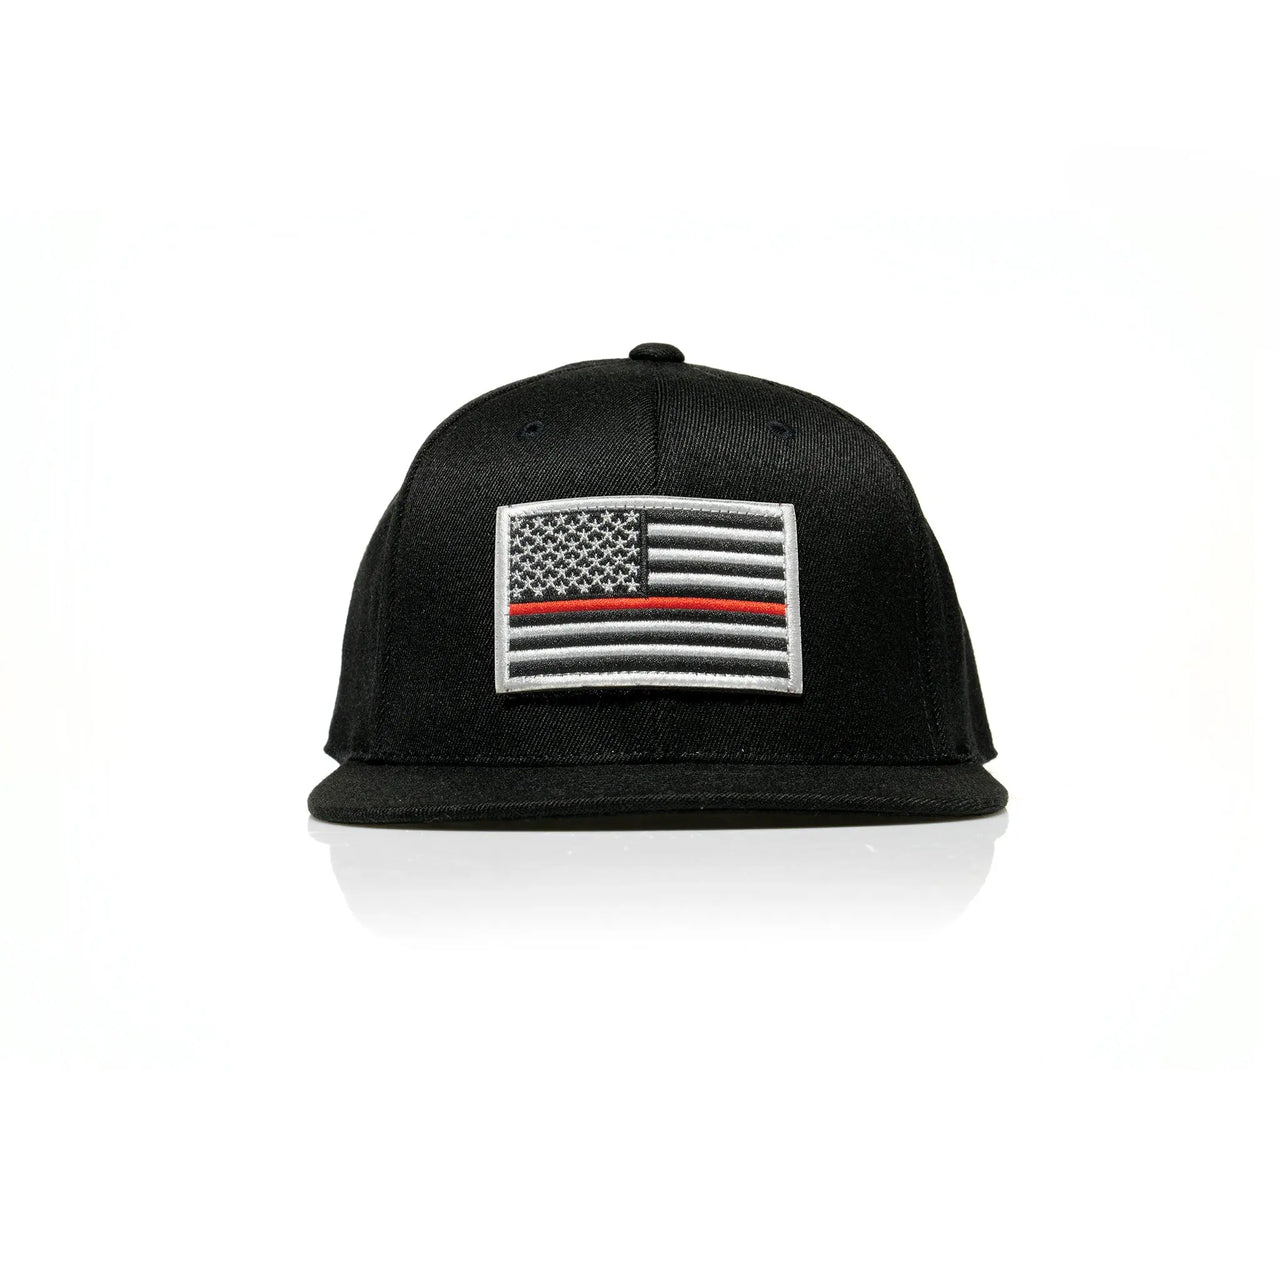 Thin Red Line Patch Flexfit Snapback 110